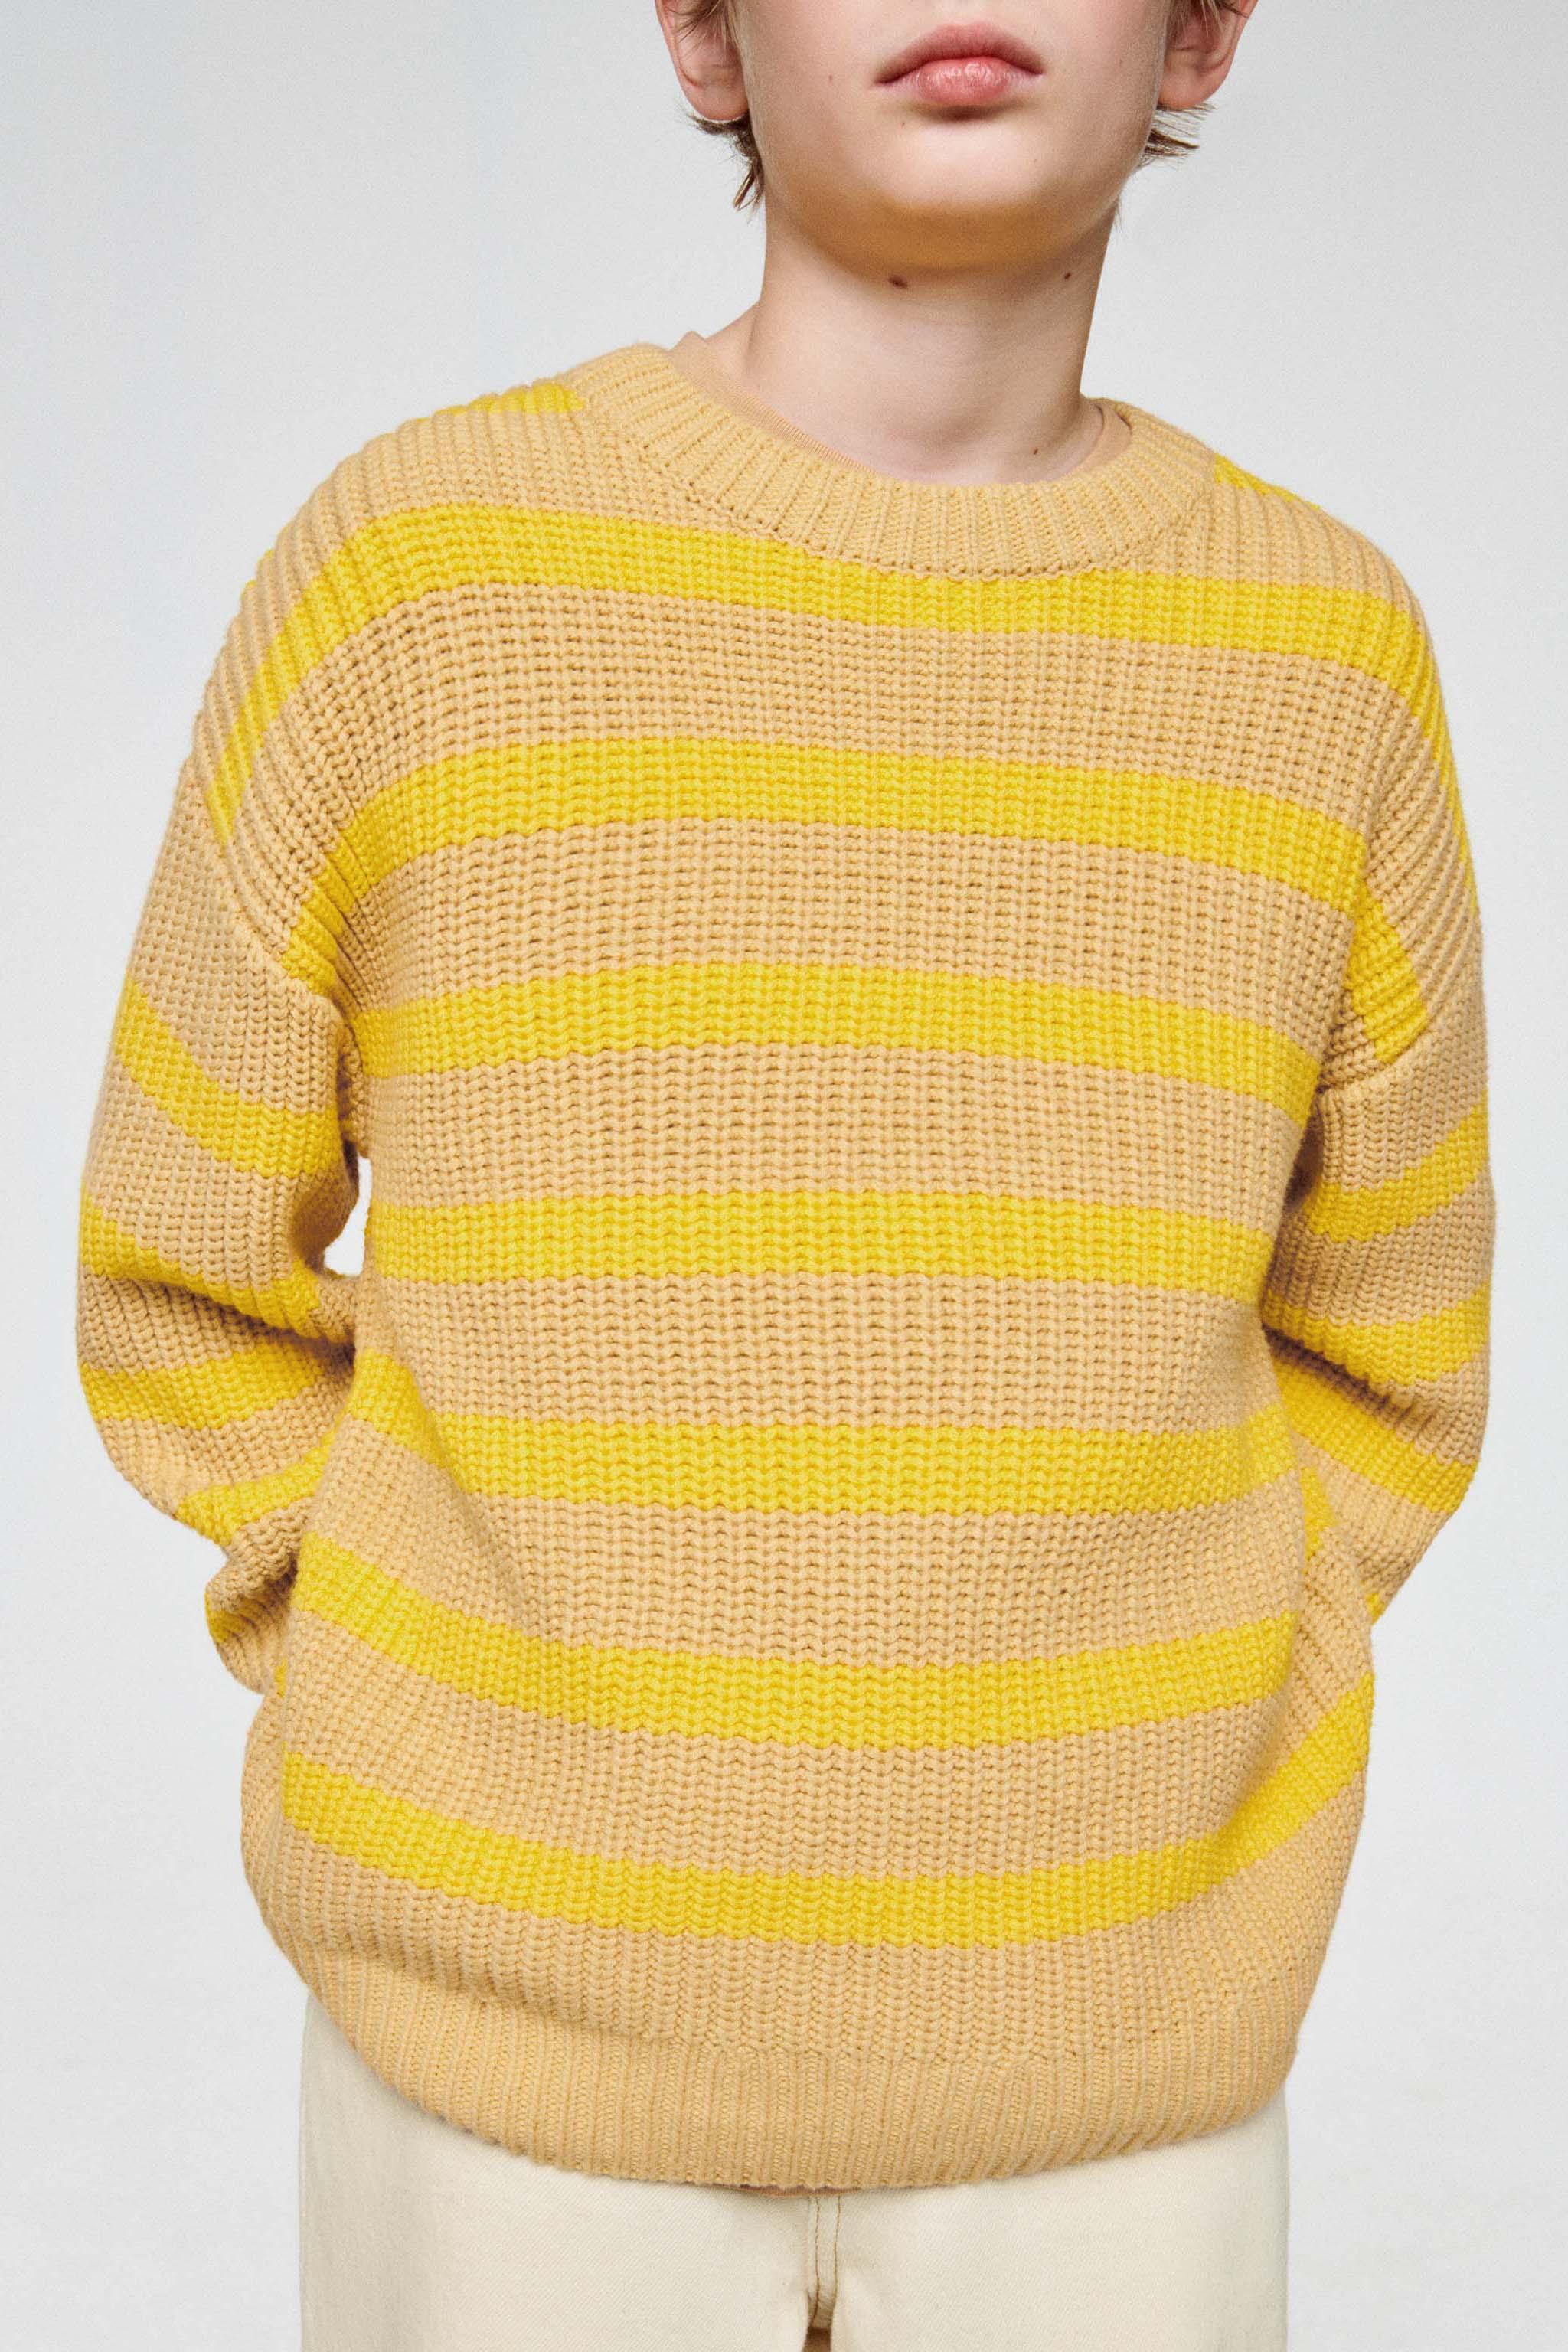 Wild Fable Sweater Yellow Size XS - $11 - From Hallee